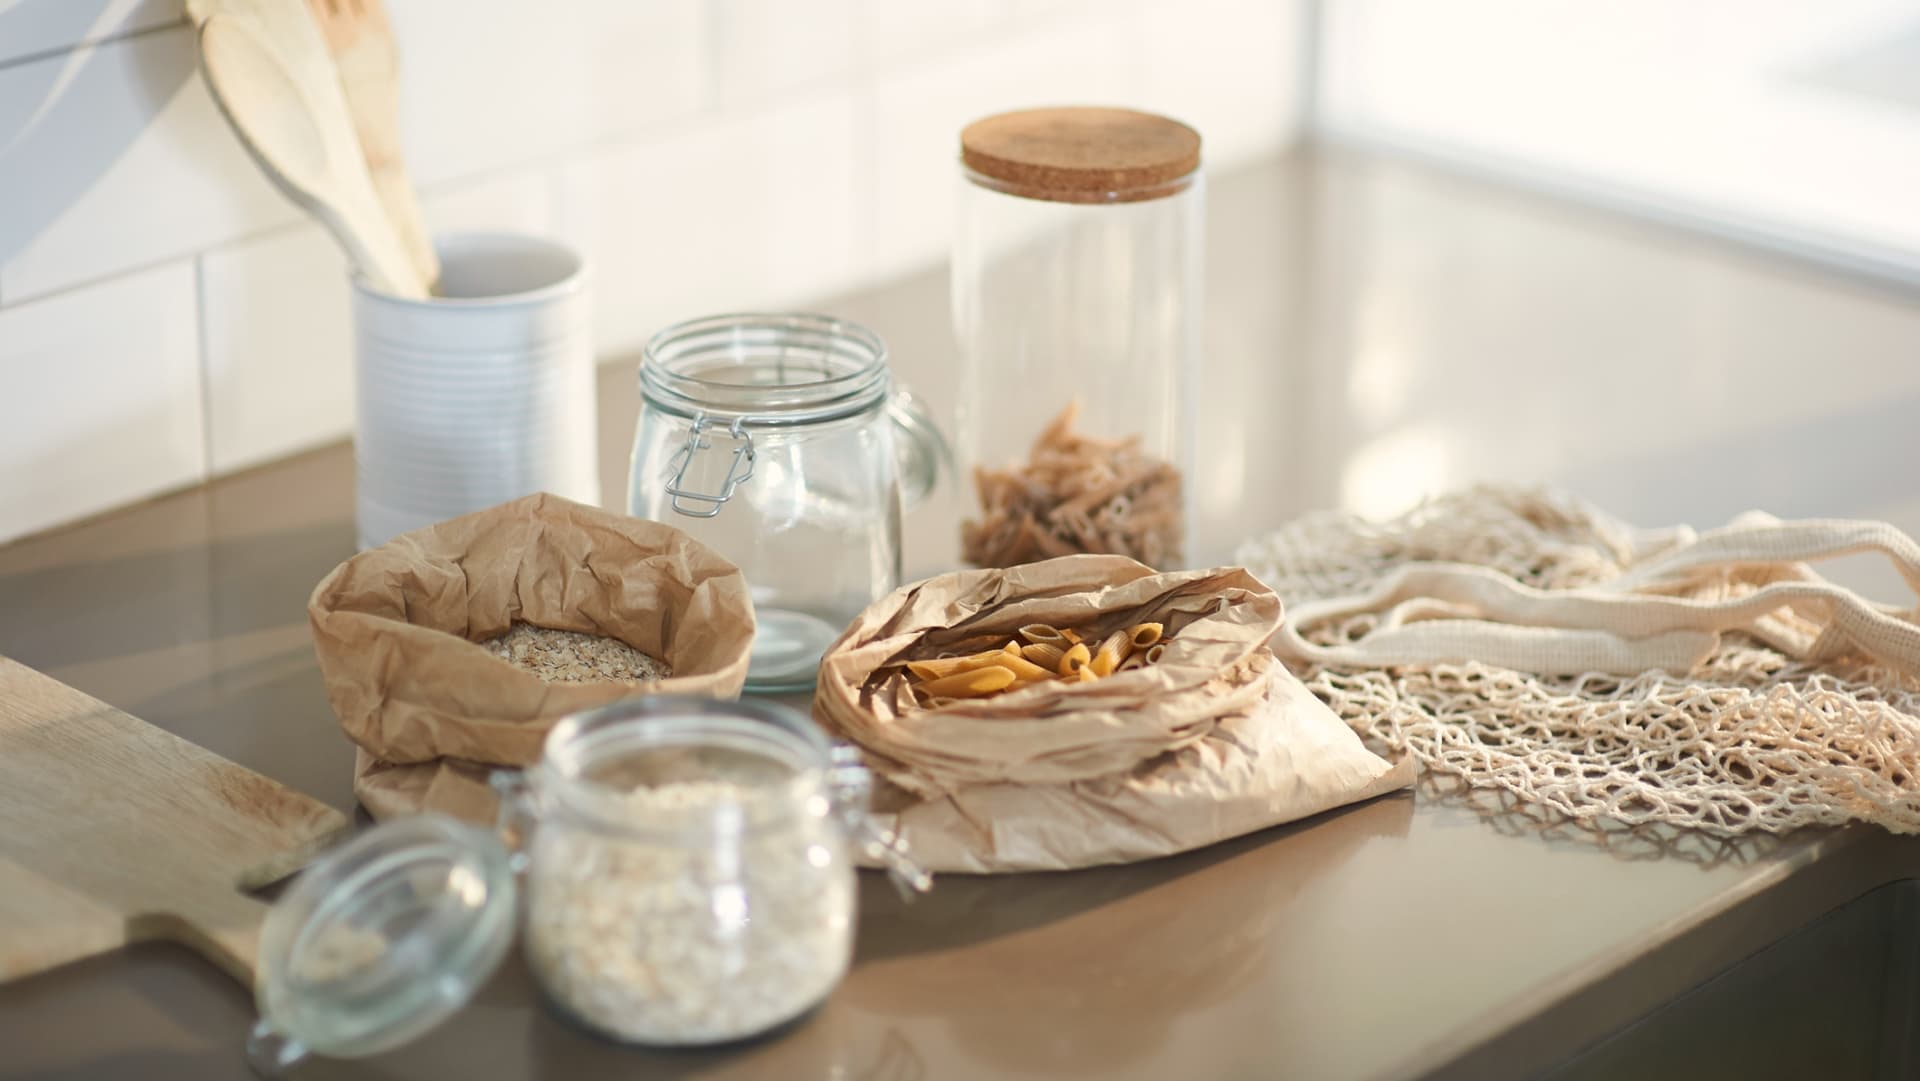 Stylized kitchen layout of pasta, rice and grains on bench being restocked into glass jars after weekly shop.